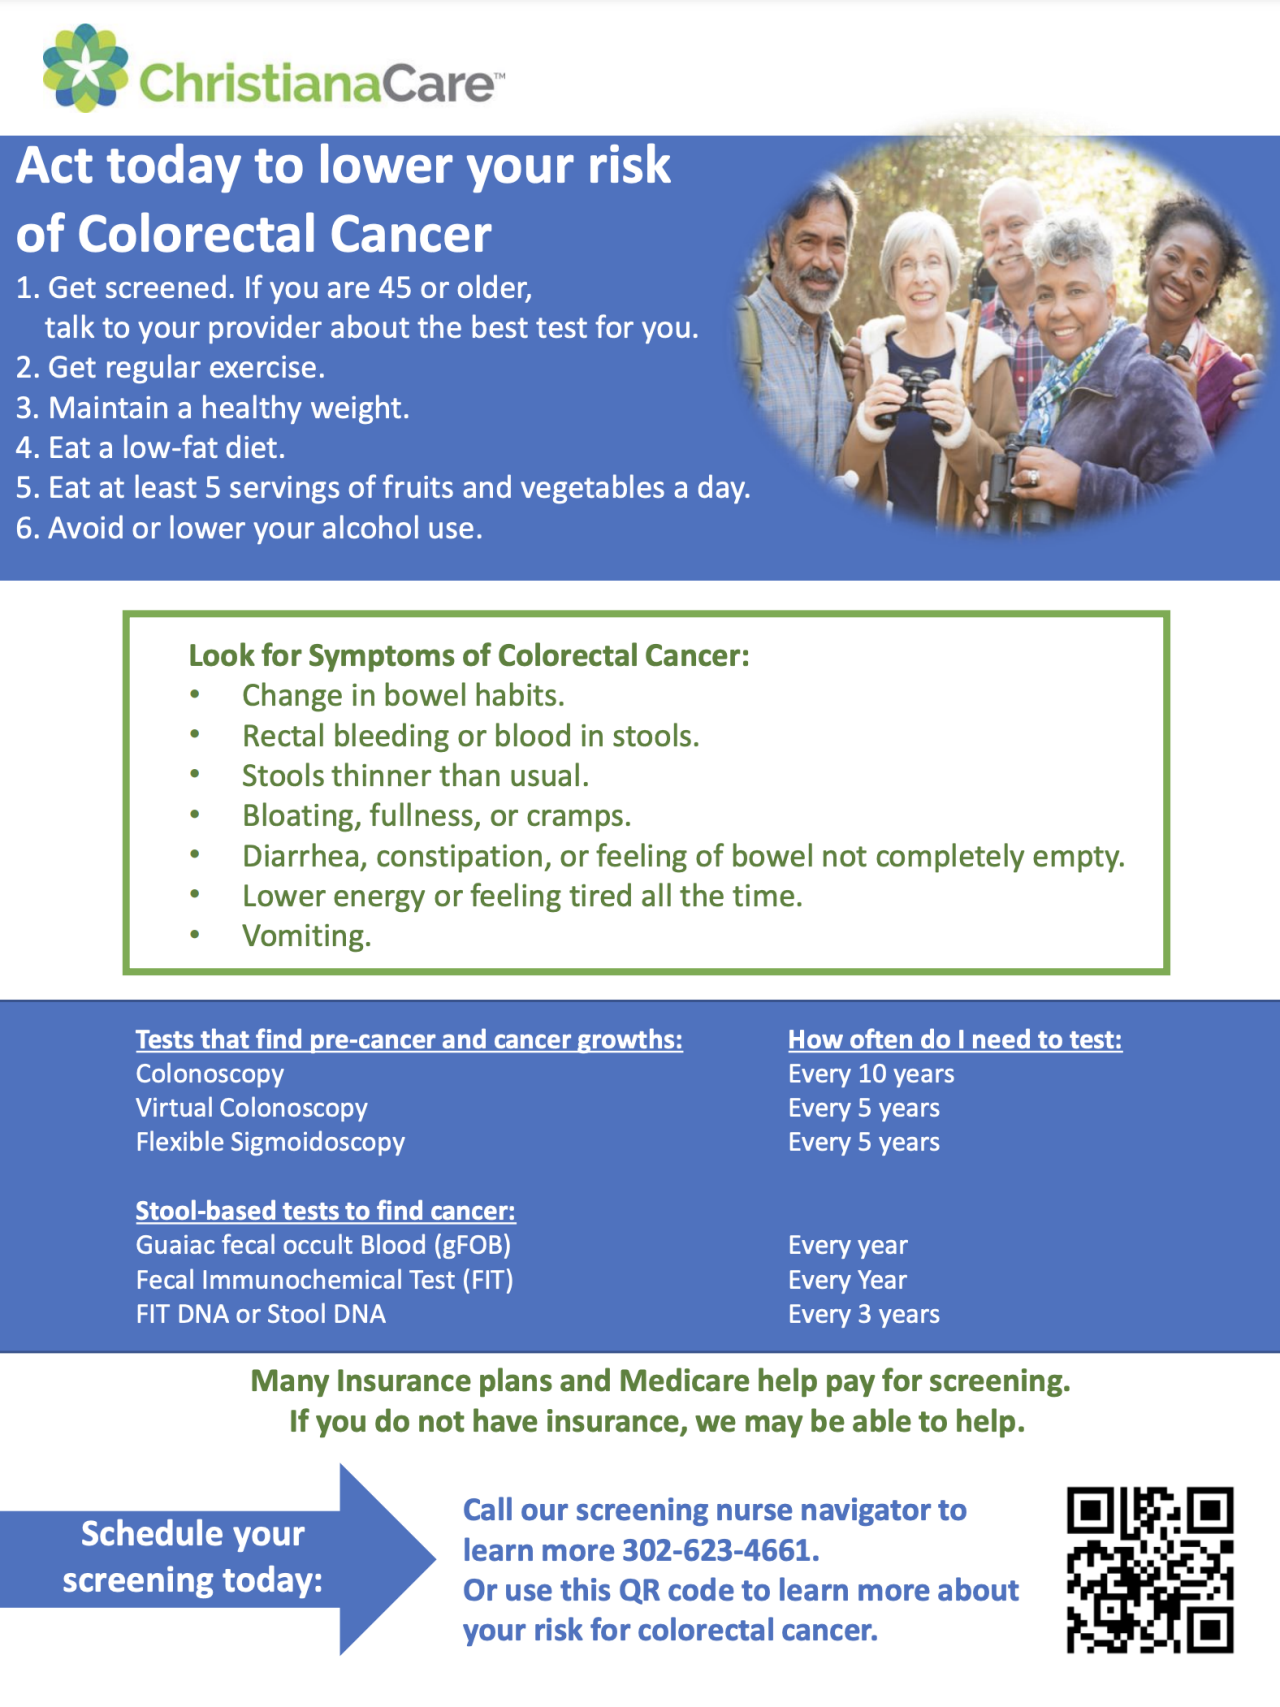 An image sample of the Colorectal Cancer awareness information sheet that is available for download